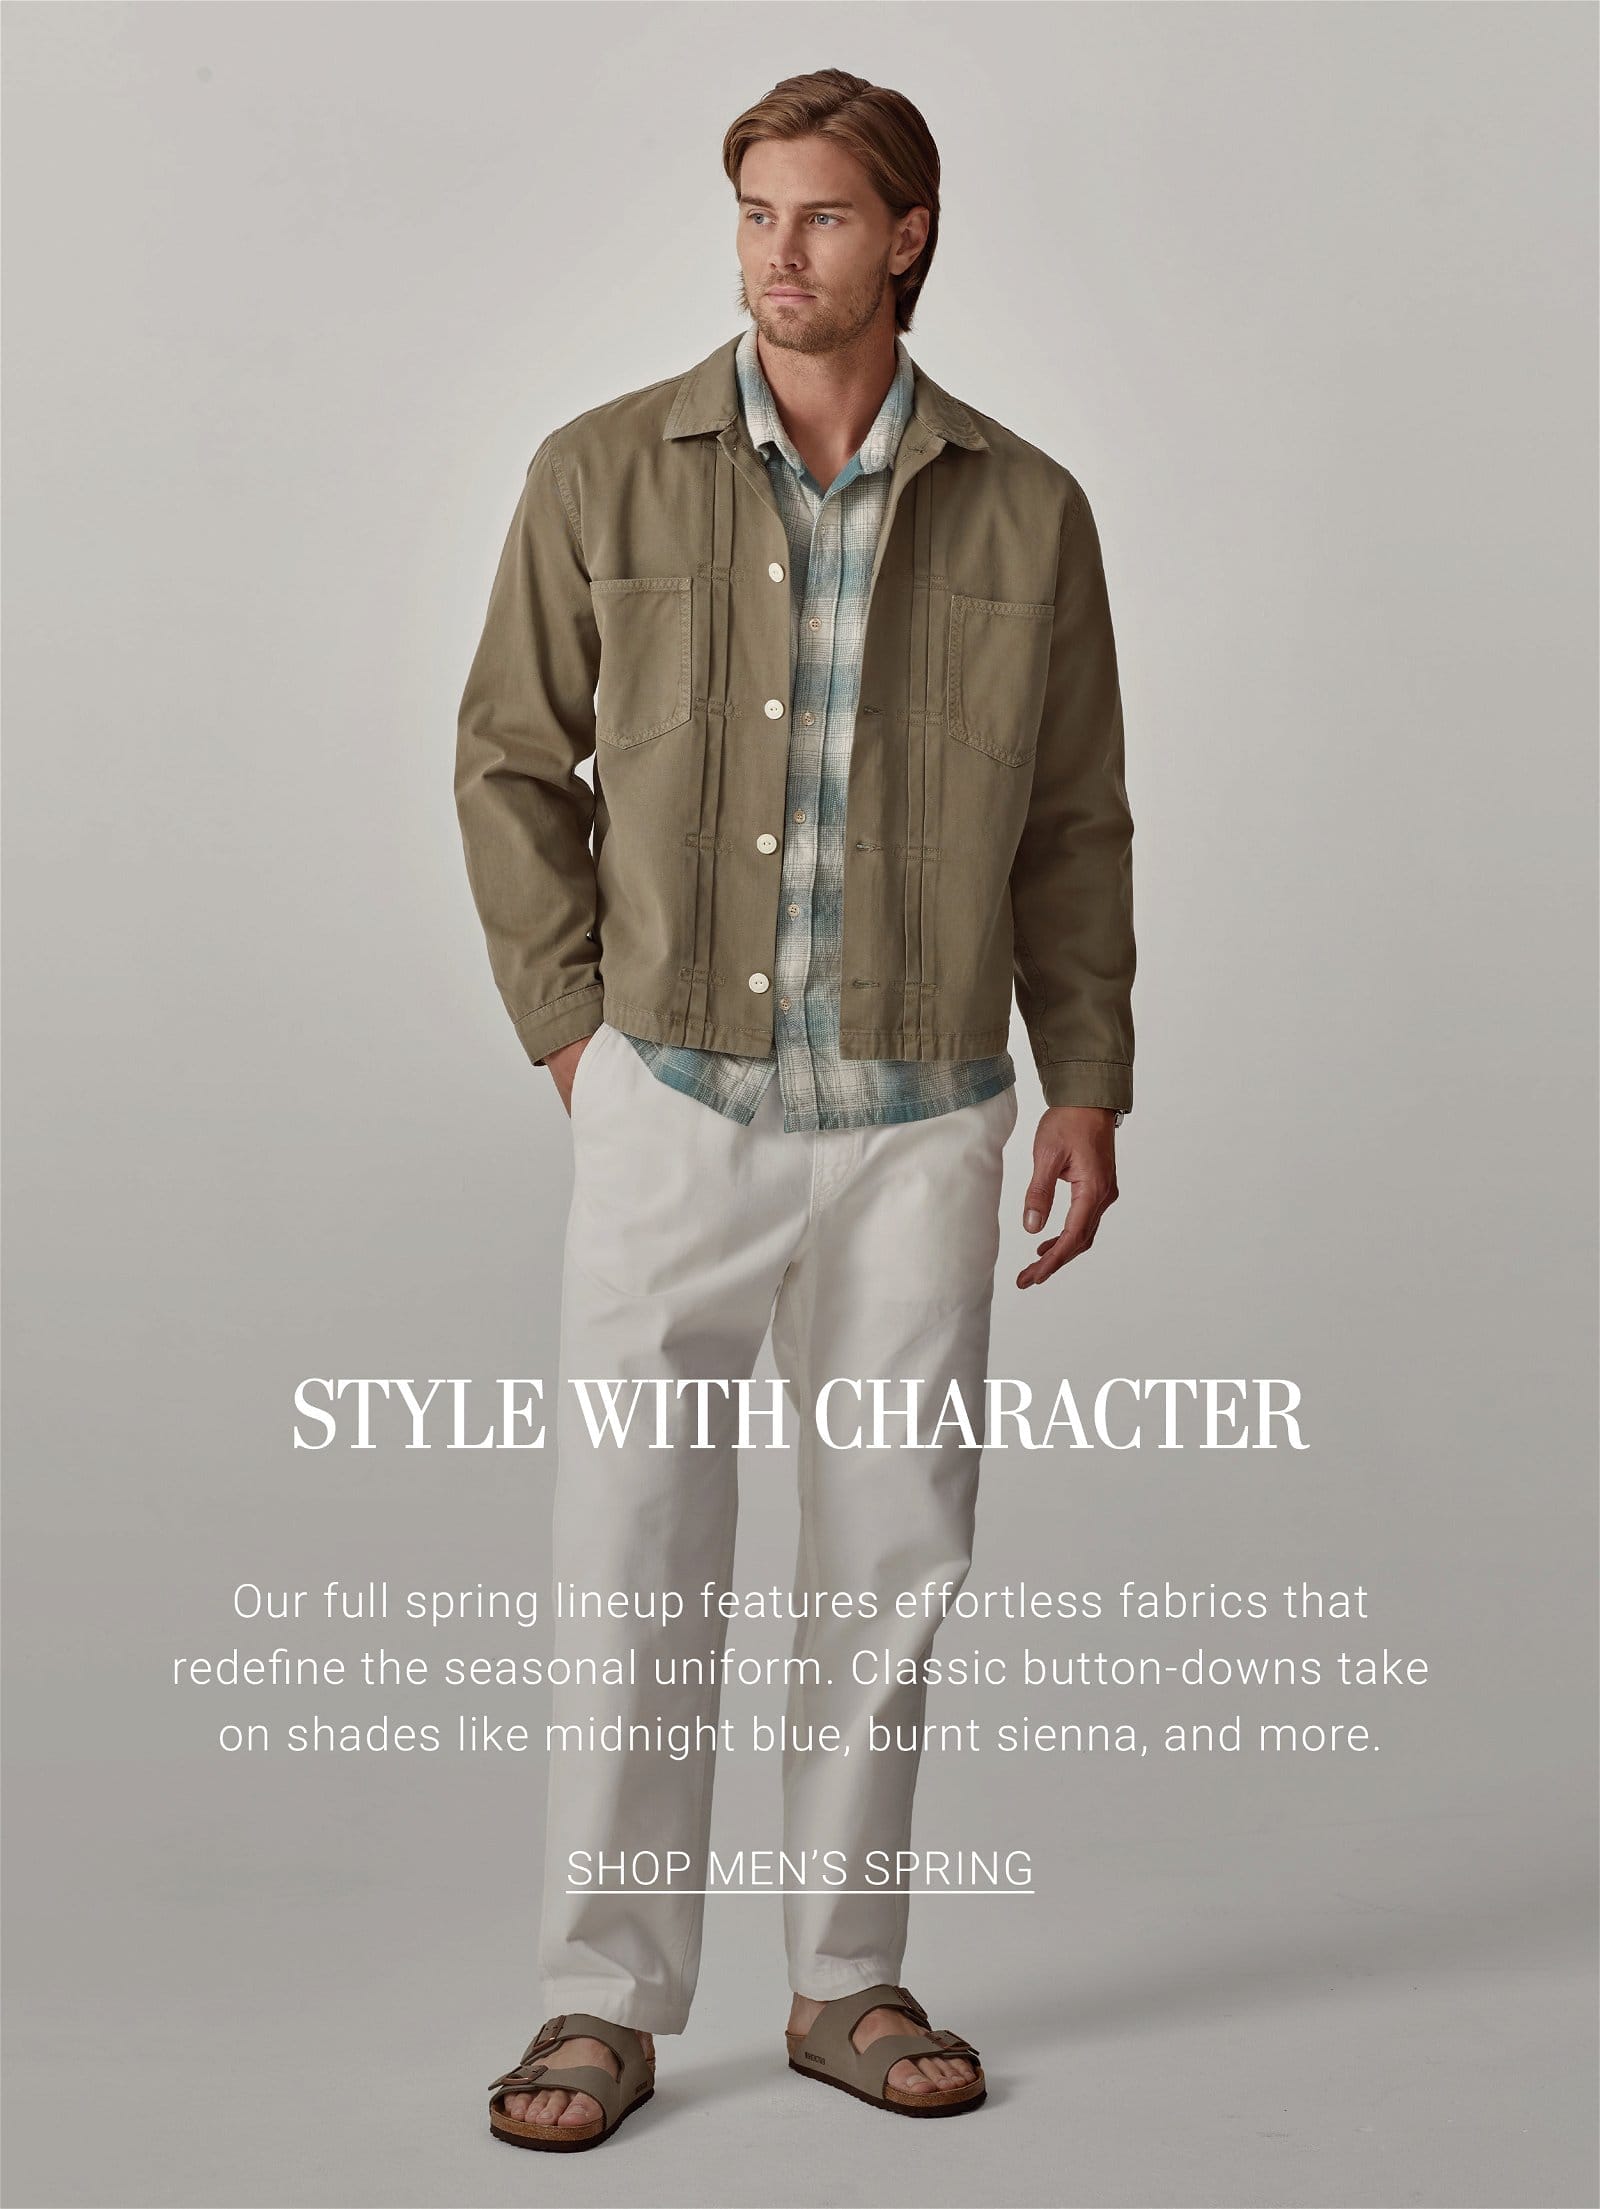 STYLE WITH CHARACTER